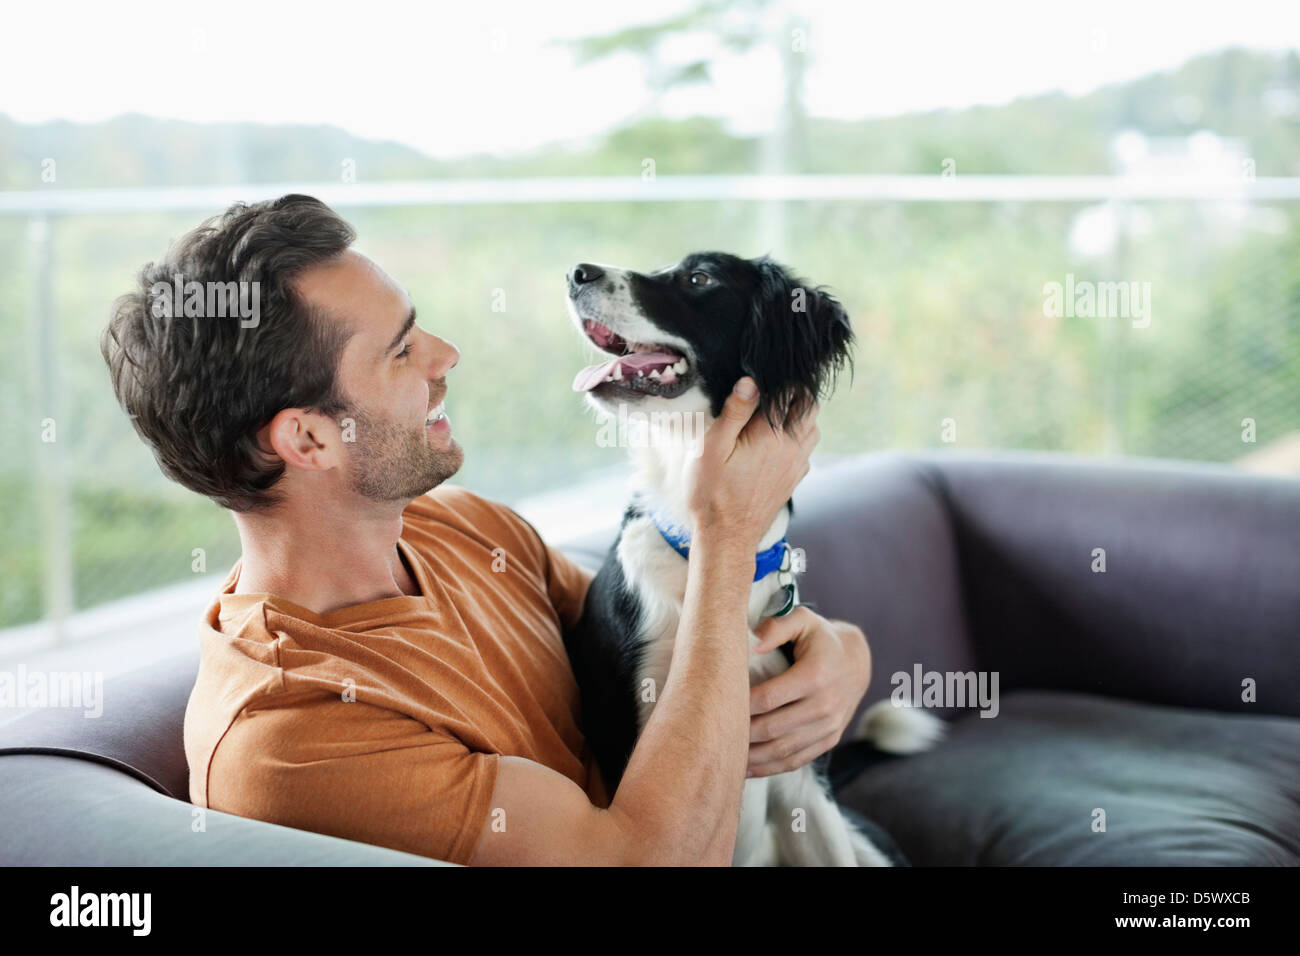 Smiling man petting dog on sofa Banque D'Images